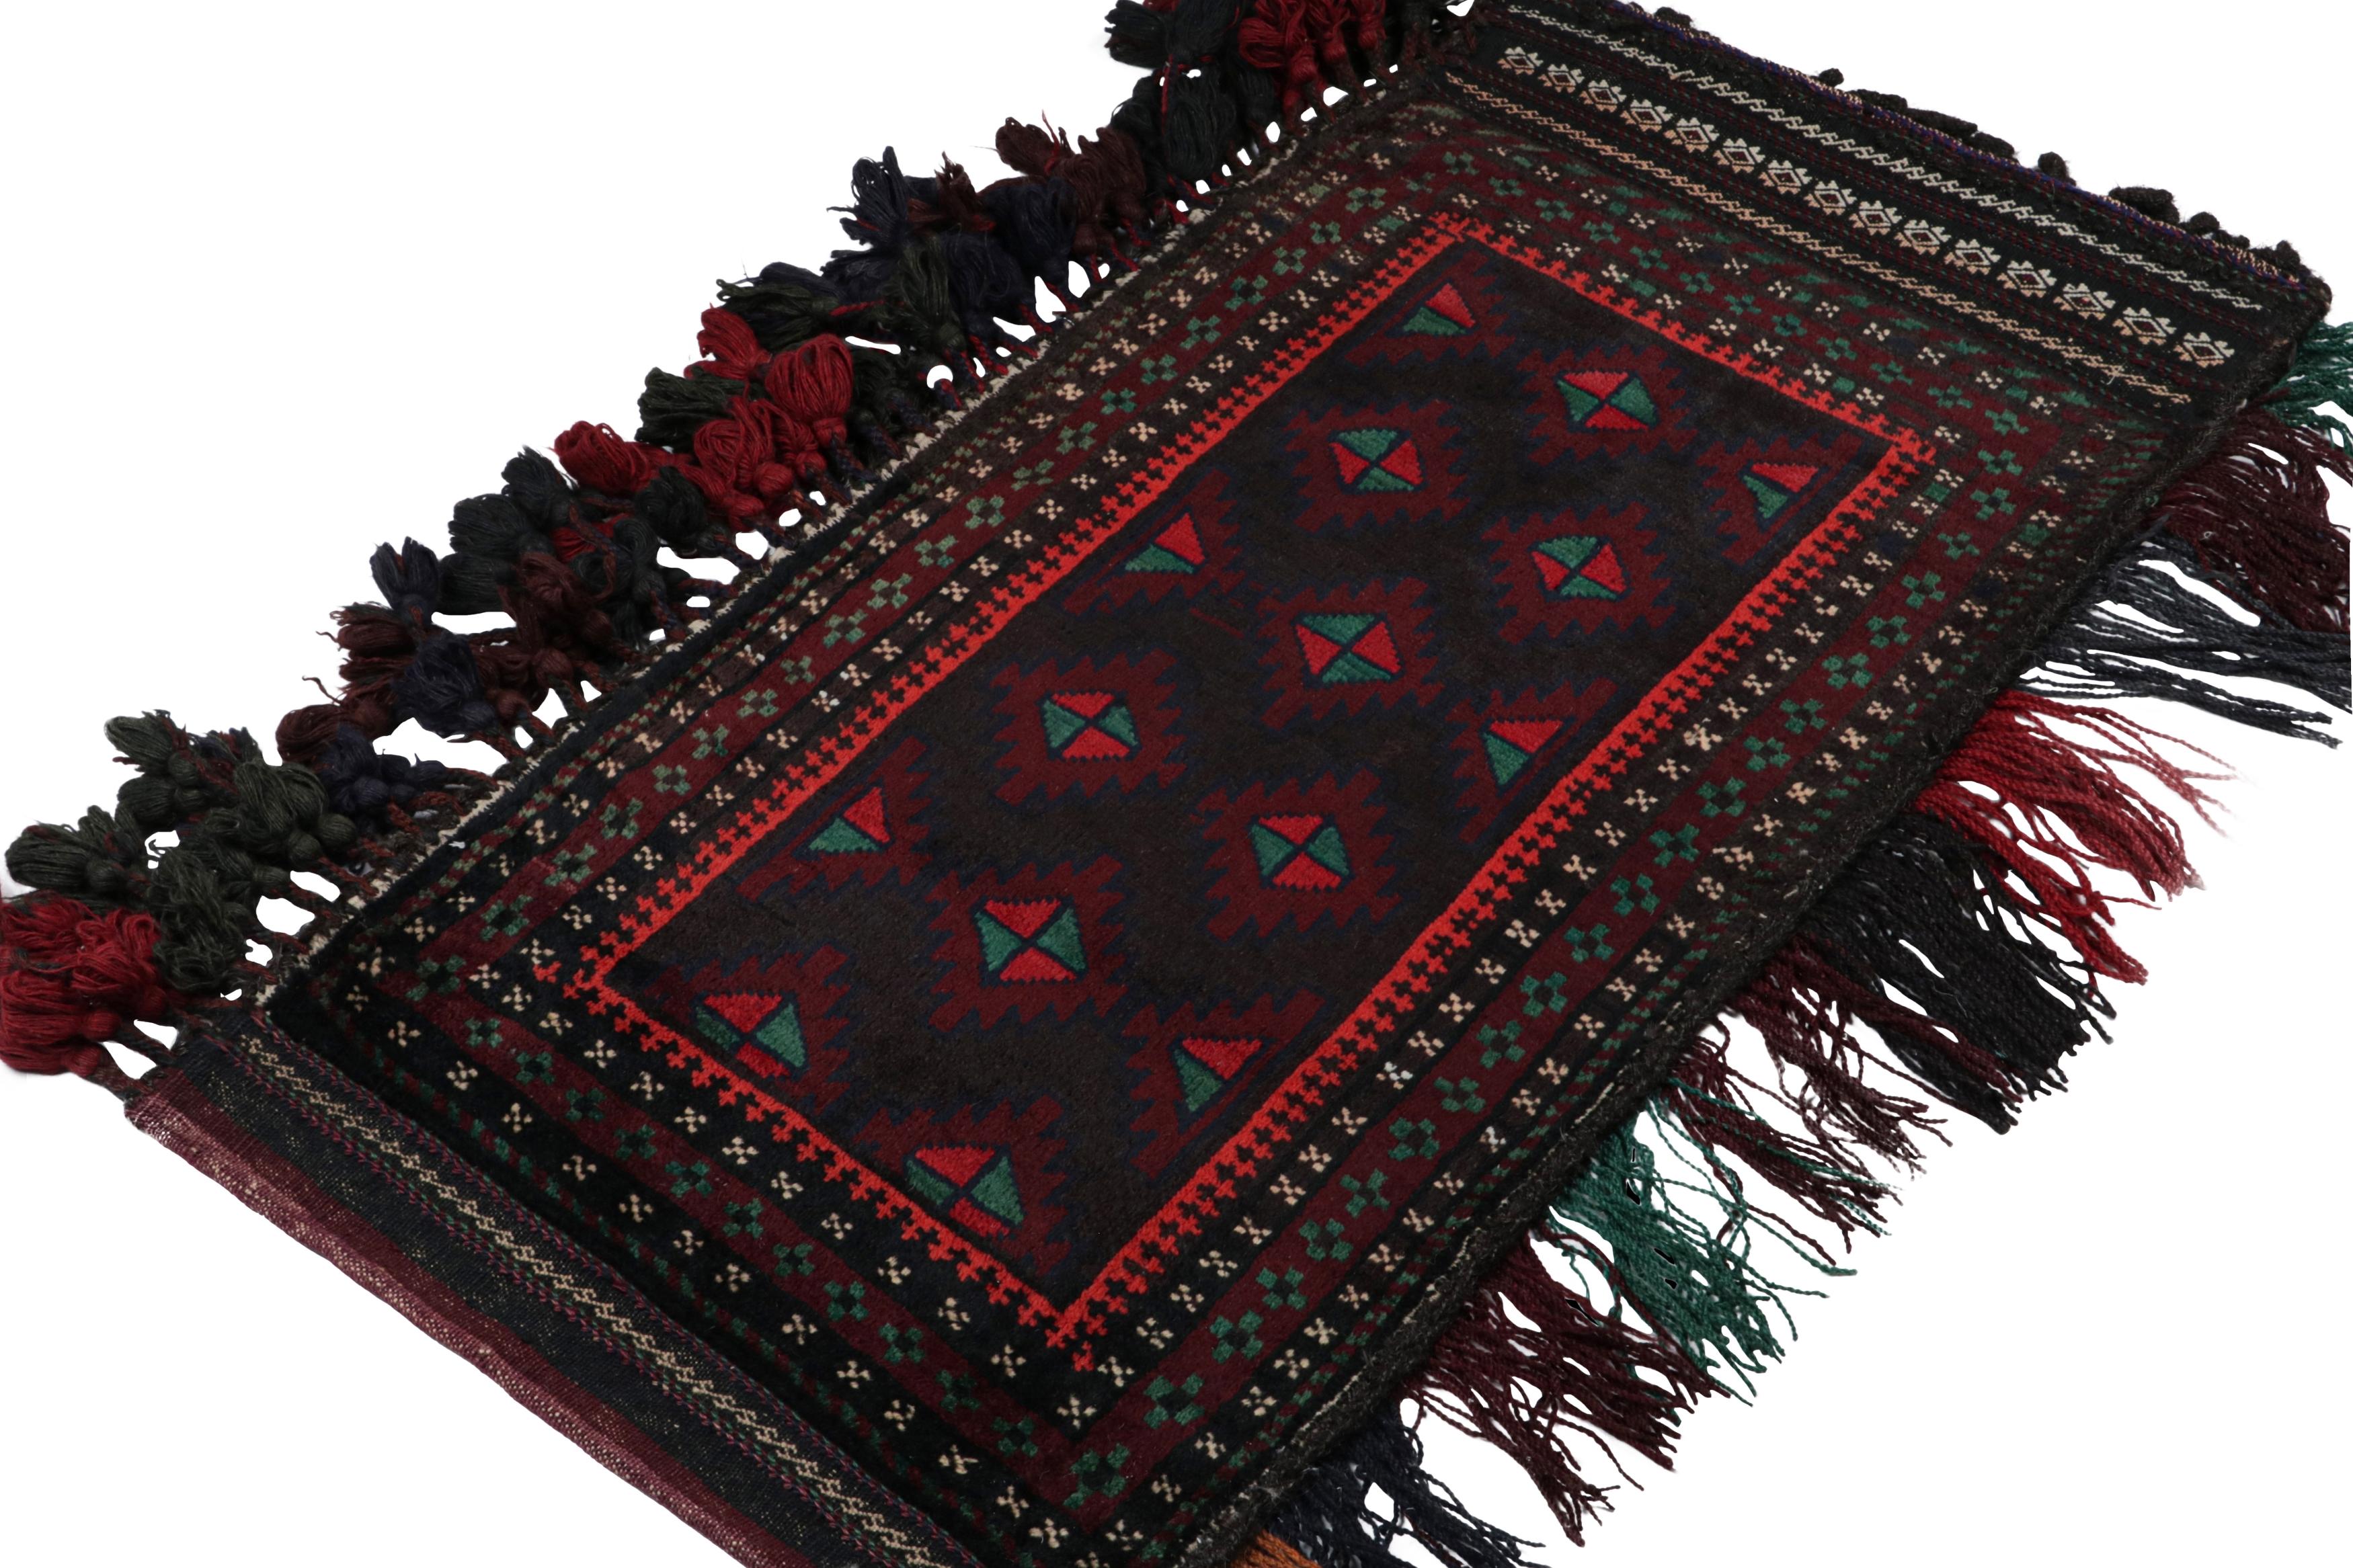 Hand-knotted in wool, this 2x4 Baluch Persian rug of the 1950s is the latest to enter Rug & Kilim’s prestigious Antique & Vintage collection.

On the Design:

The vintage Baluch rug features tribal patterns in rich tones of red & green on black. The